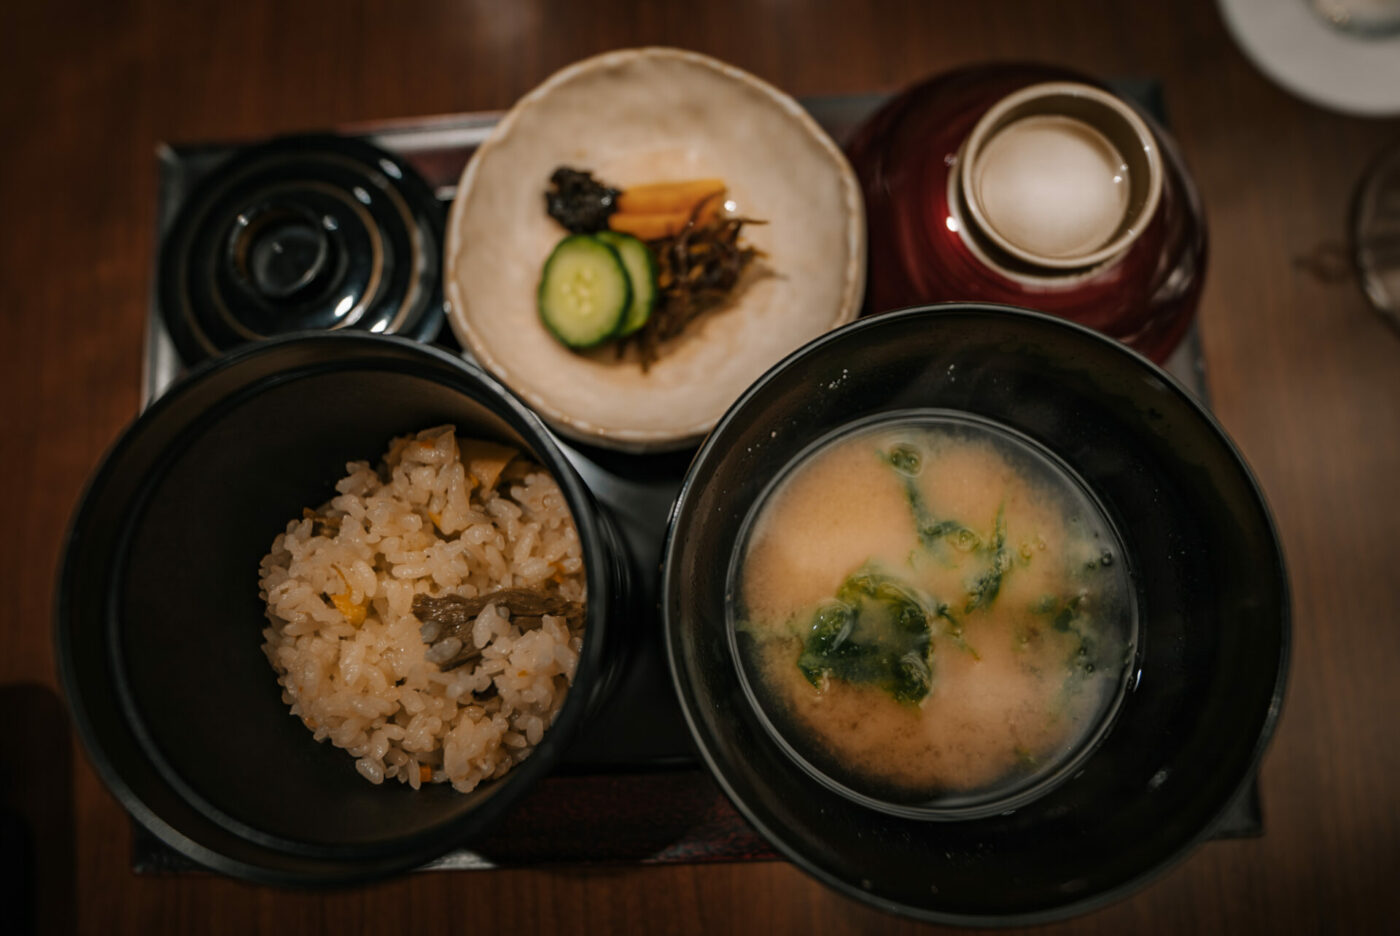 Miso soup bowl on the right.